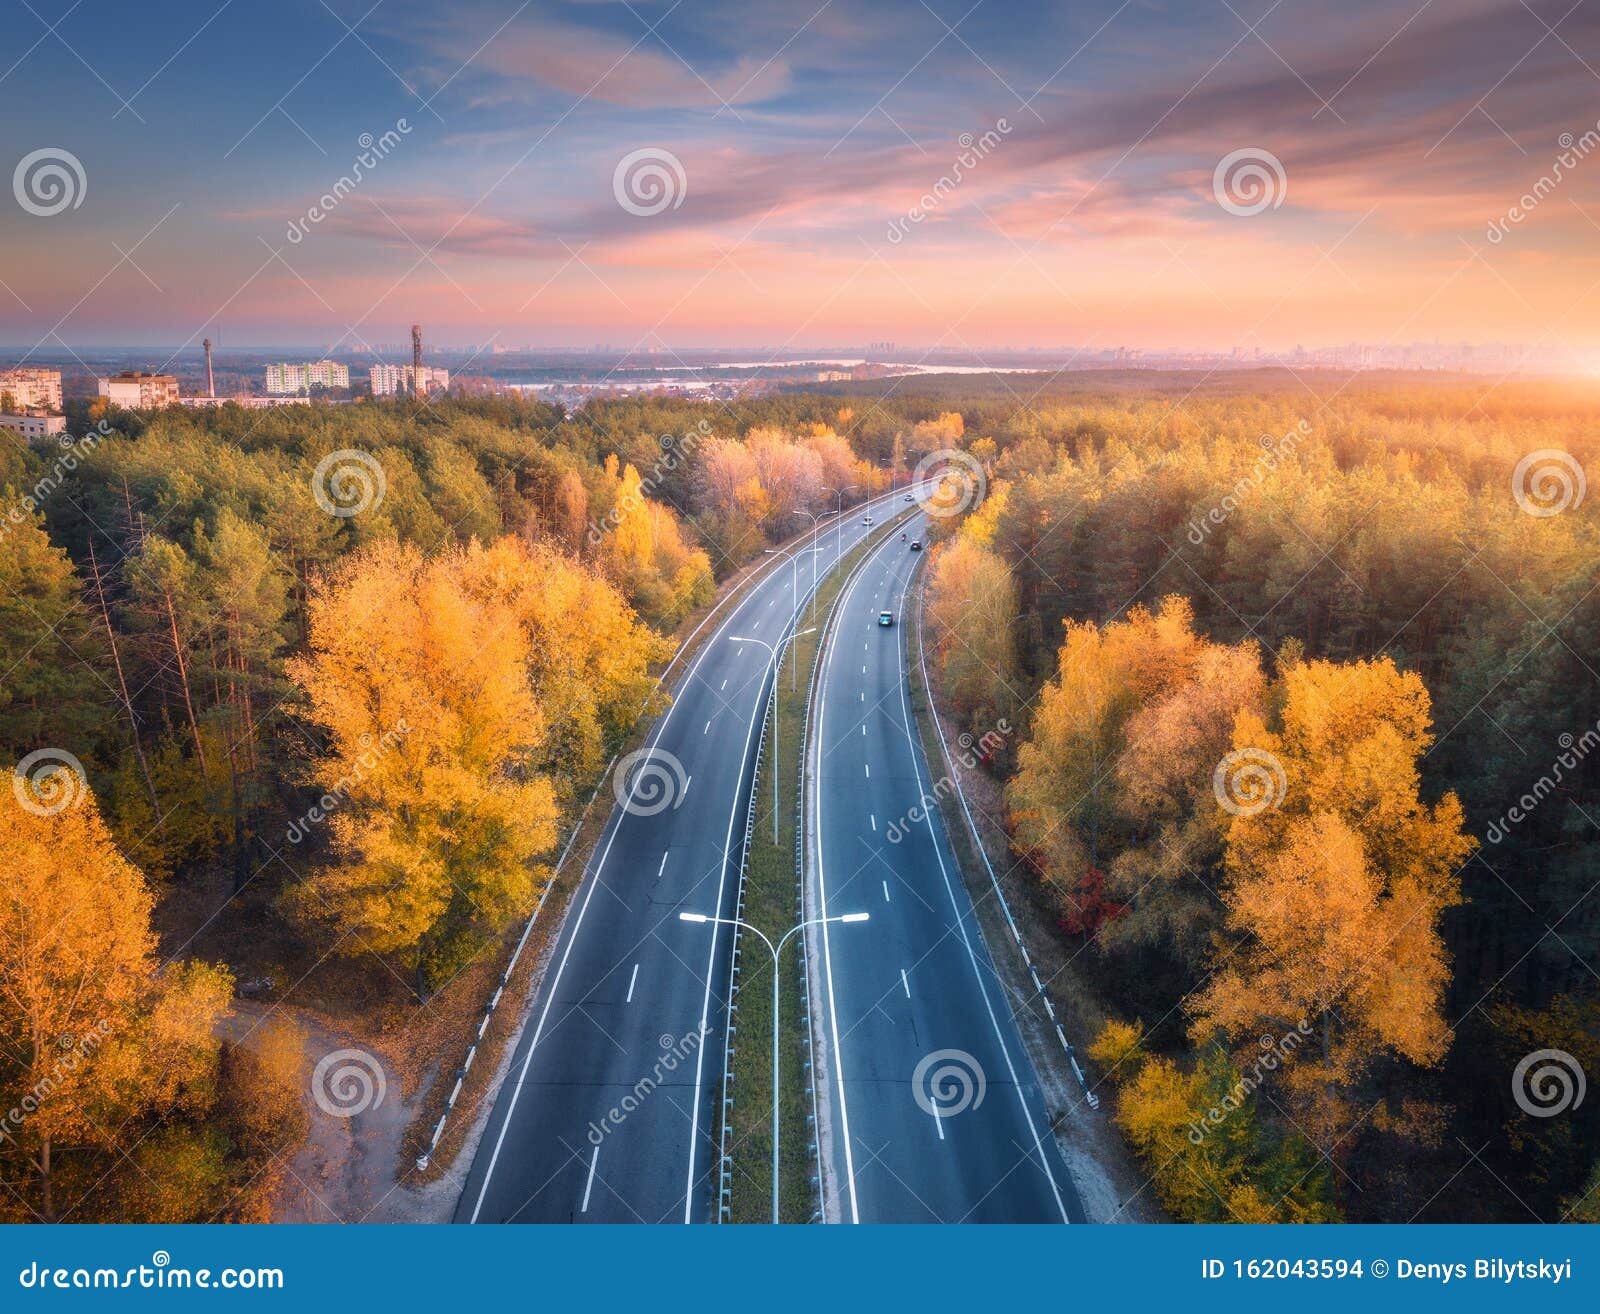 Aerial View Of Asphalt Road In Beautiful Autumn Forest At Sunset Stock